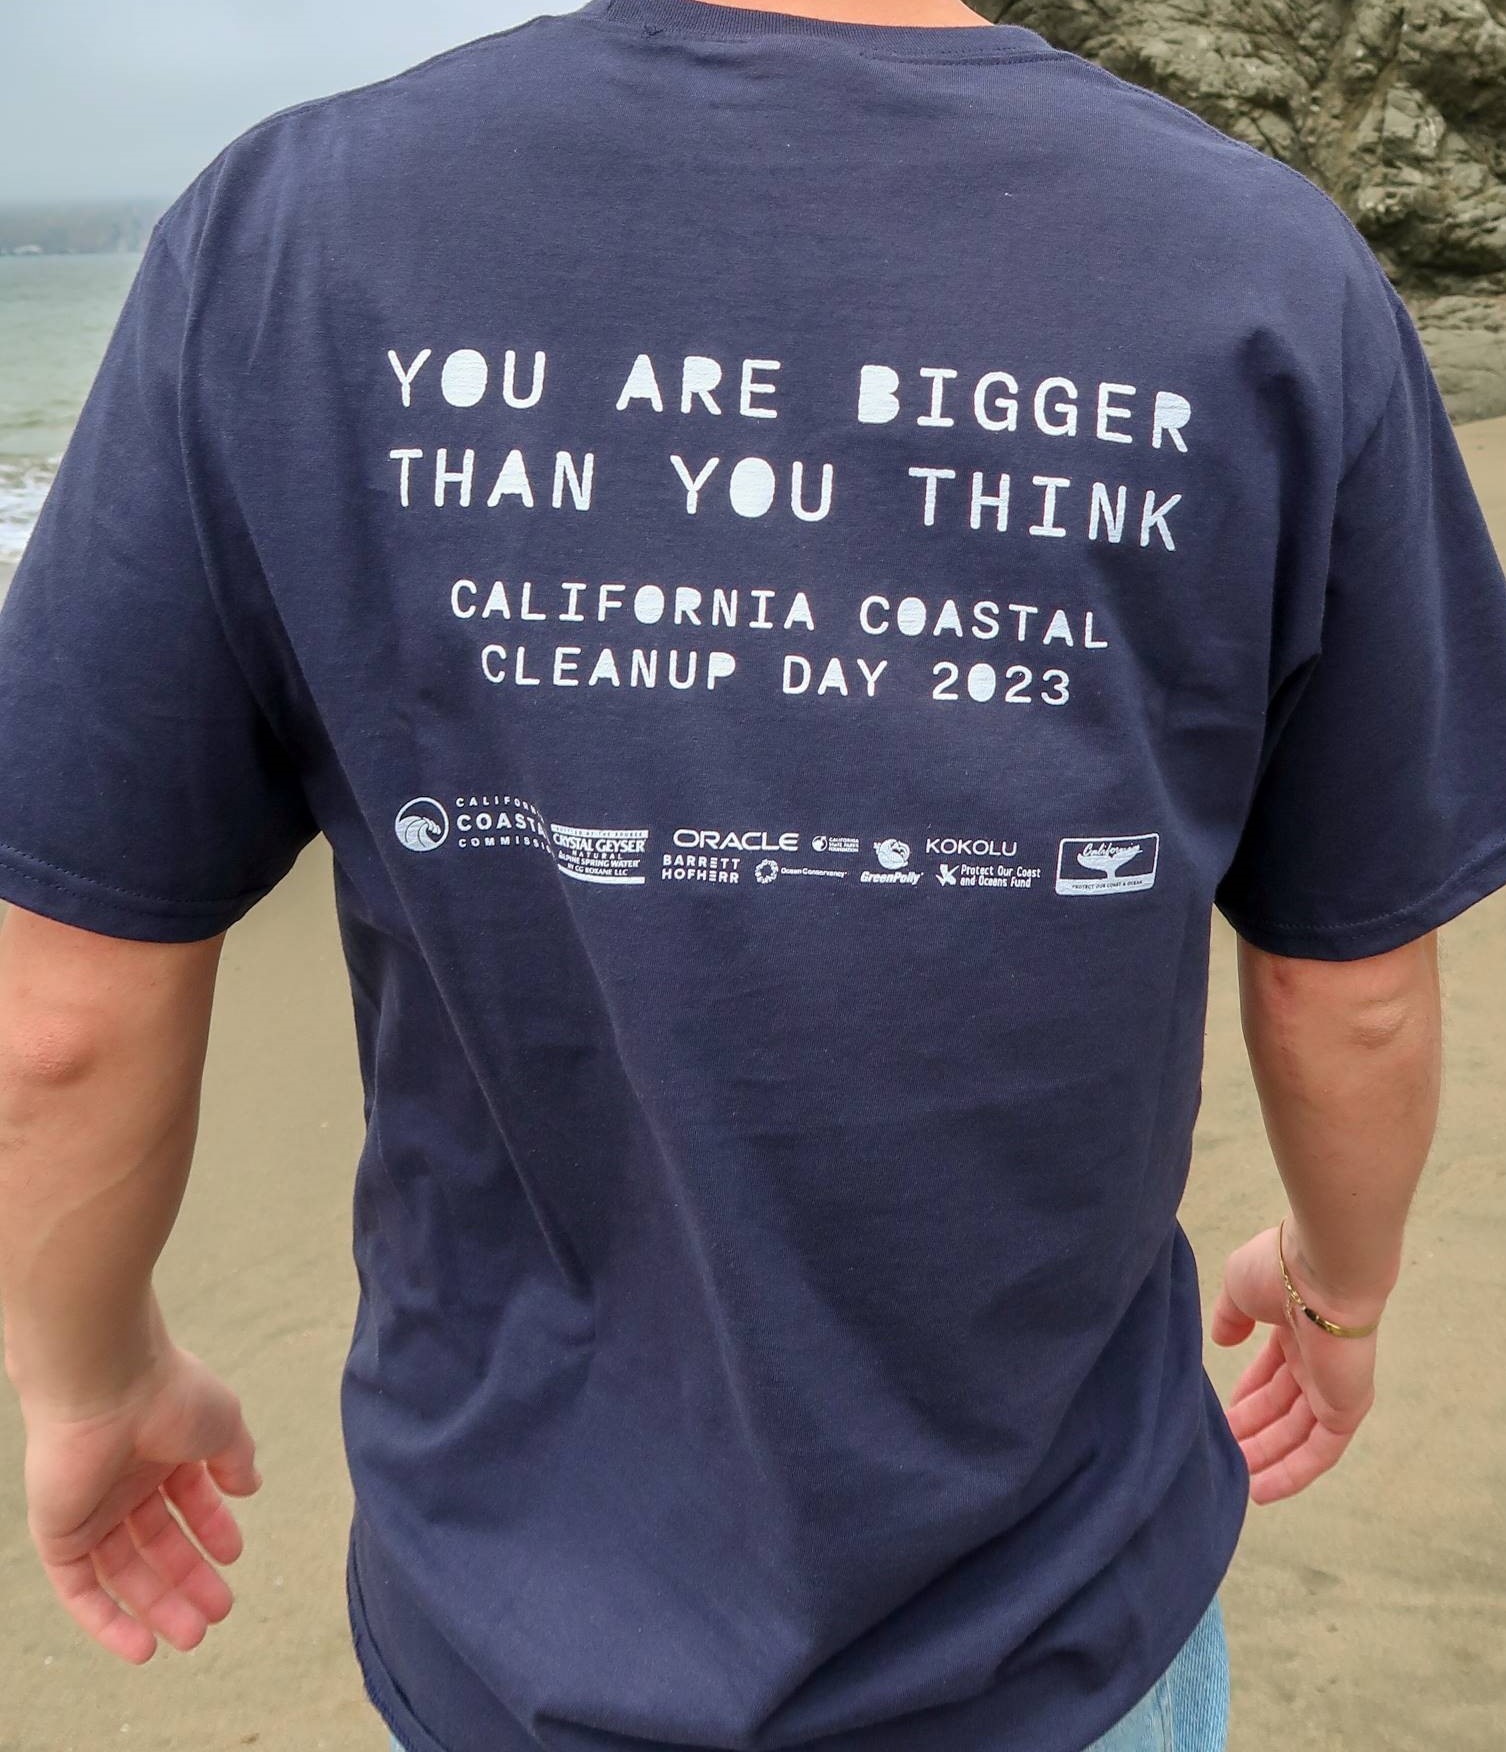 2023 Coastal Cleanup Day back of shirt